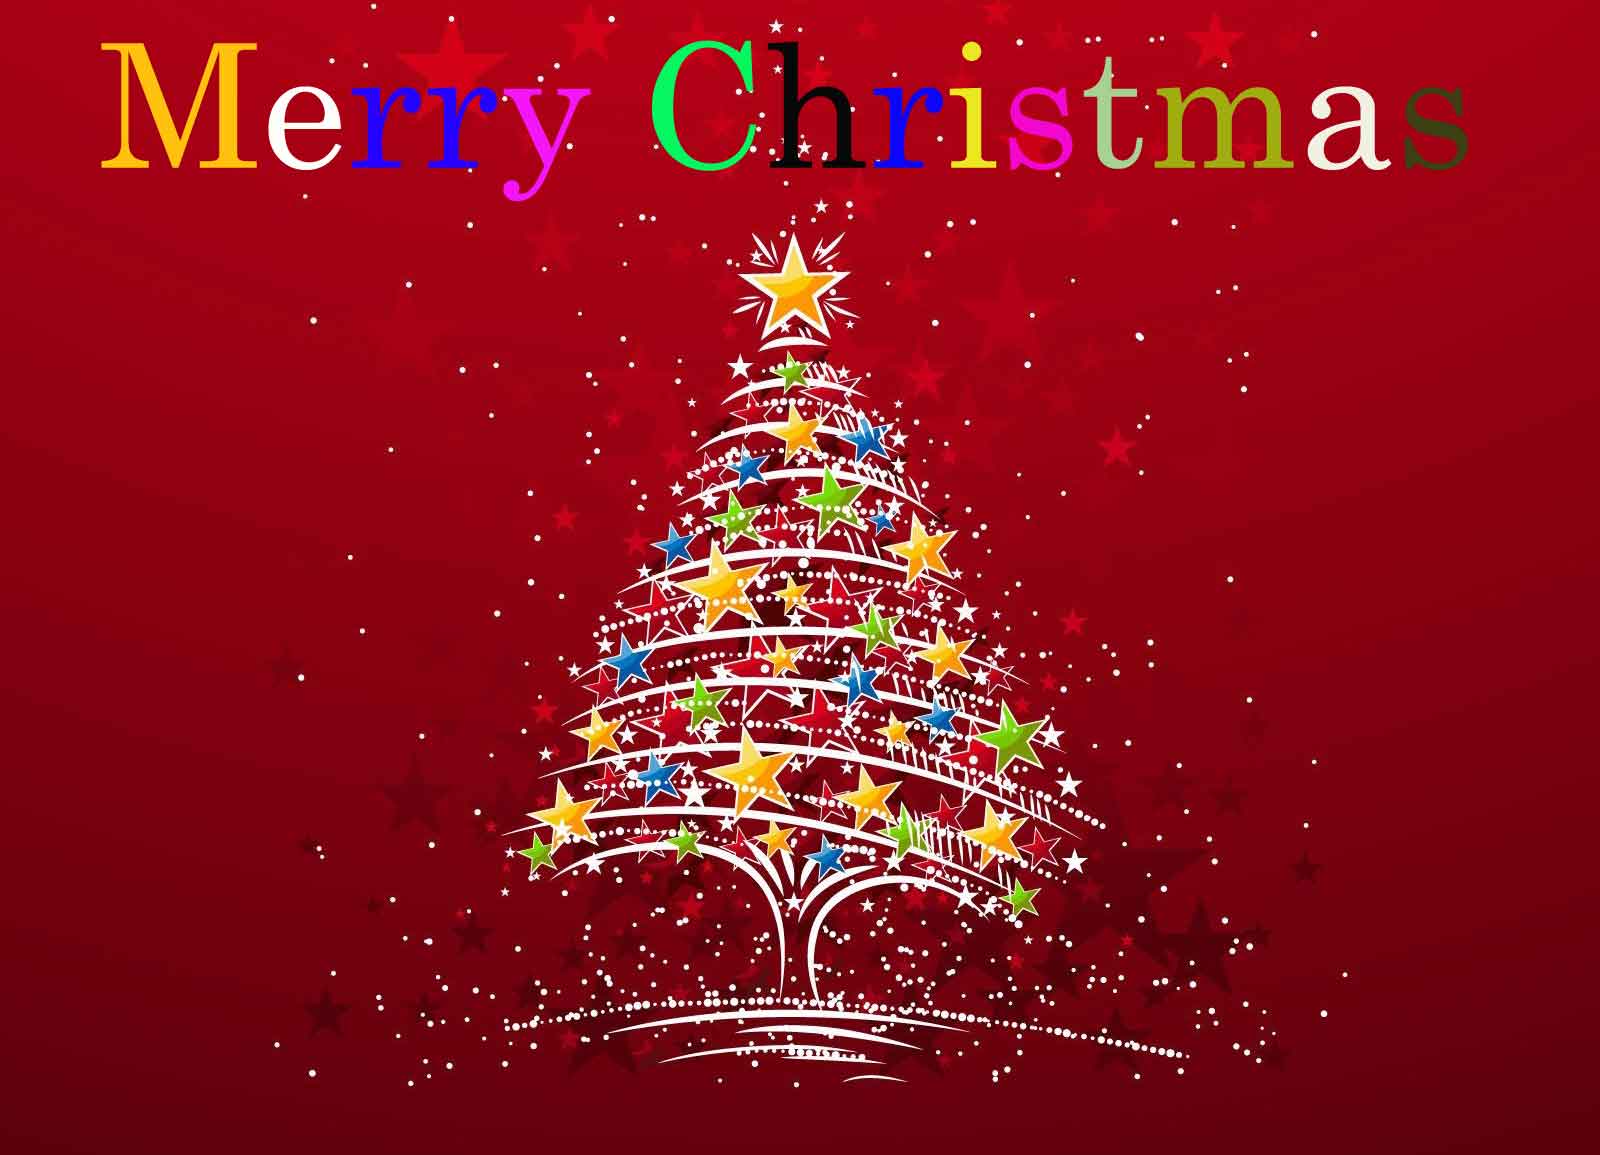 Merry Christmas 2017 HD Wallpaper and Image